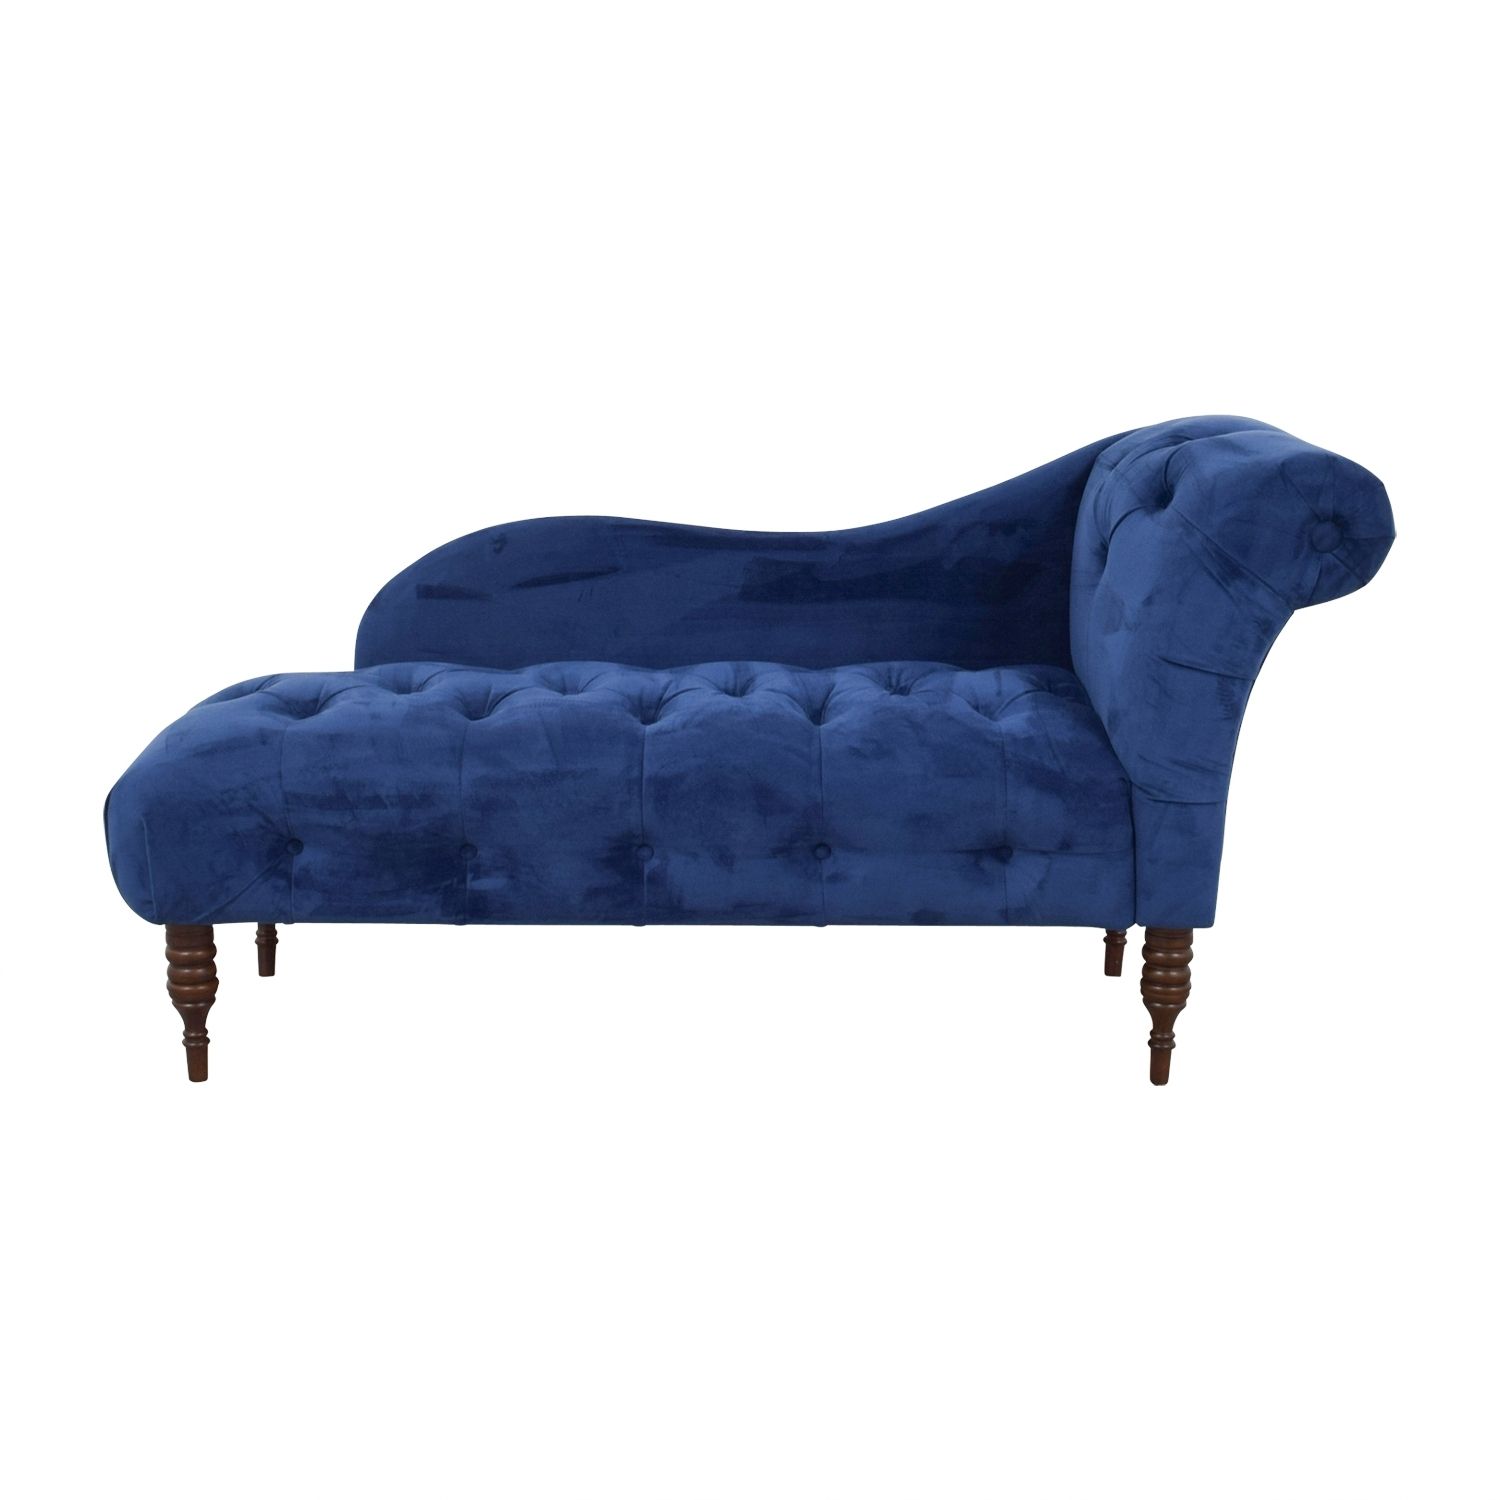 [%39% Off – One Kings Lane One Kings Lane Abbyson Francis Tufted Intended For 2018 Blue Chaises|blue Chaises Inside Fashionable 39% Off – One Kings Lane One Kings Lane Abbyson Francis Tufted|most Up To Date Blue Chaises Intended For 39% Off – One Kings Lane One Kings Lane Abbyson Francis Tufted|favorite 39% Off – One Kings Lane One Kings Lane Abbyson Francis Tufted Inside Blue Chaises%] (View 14 of 15)